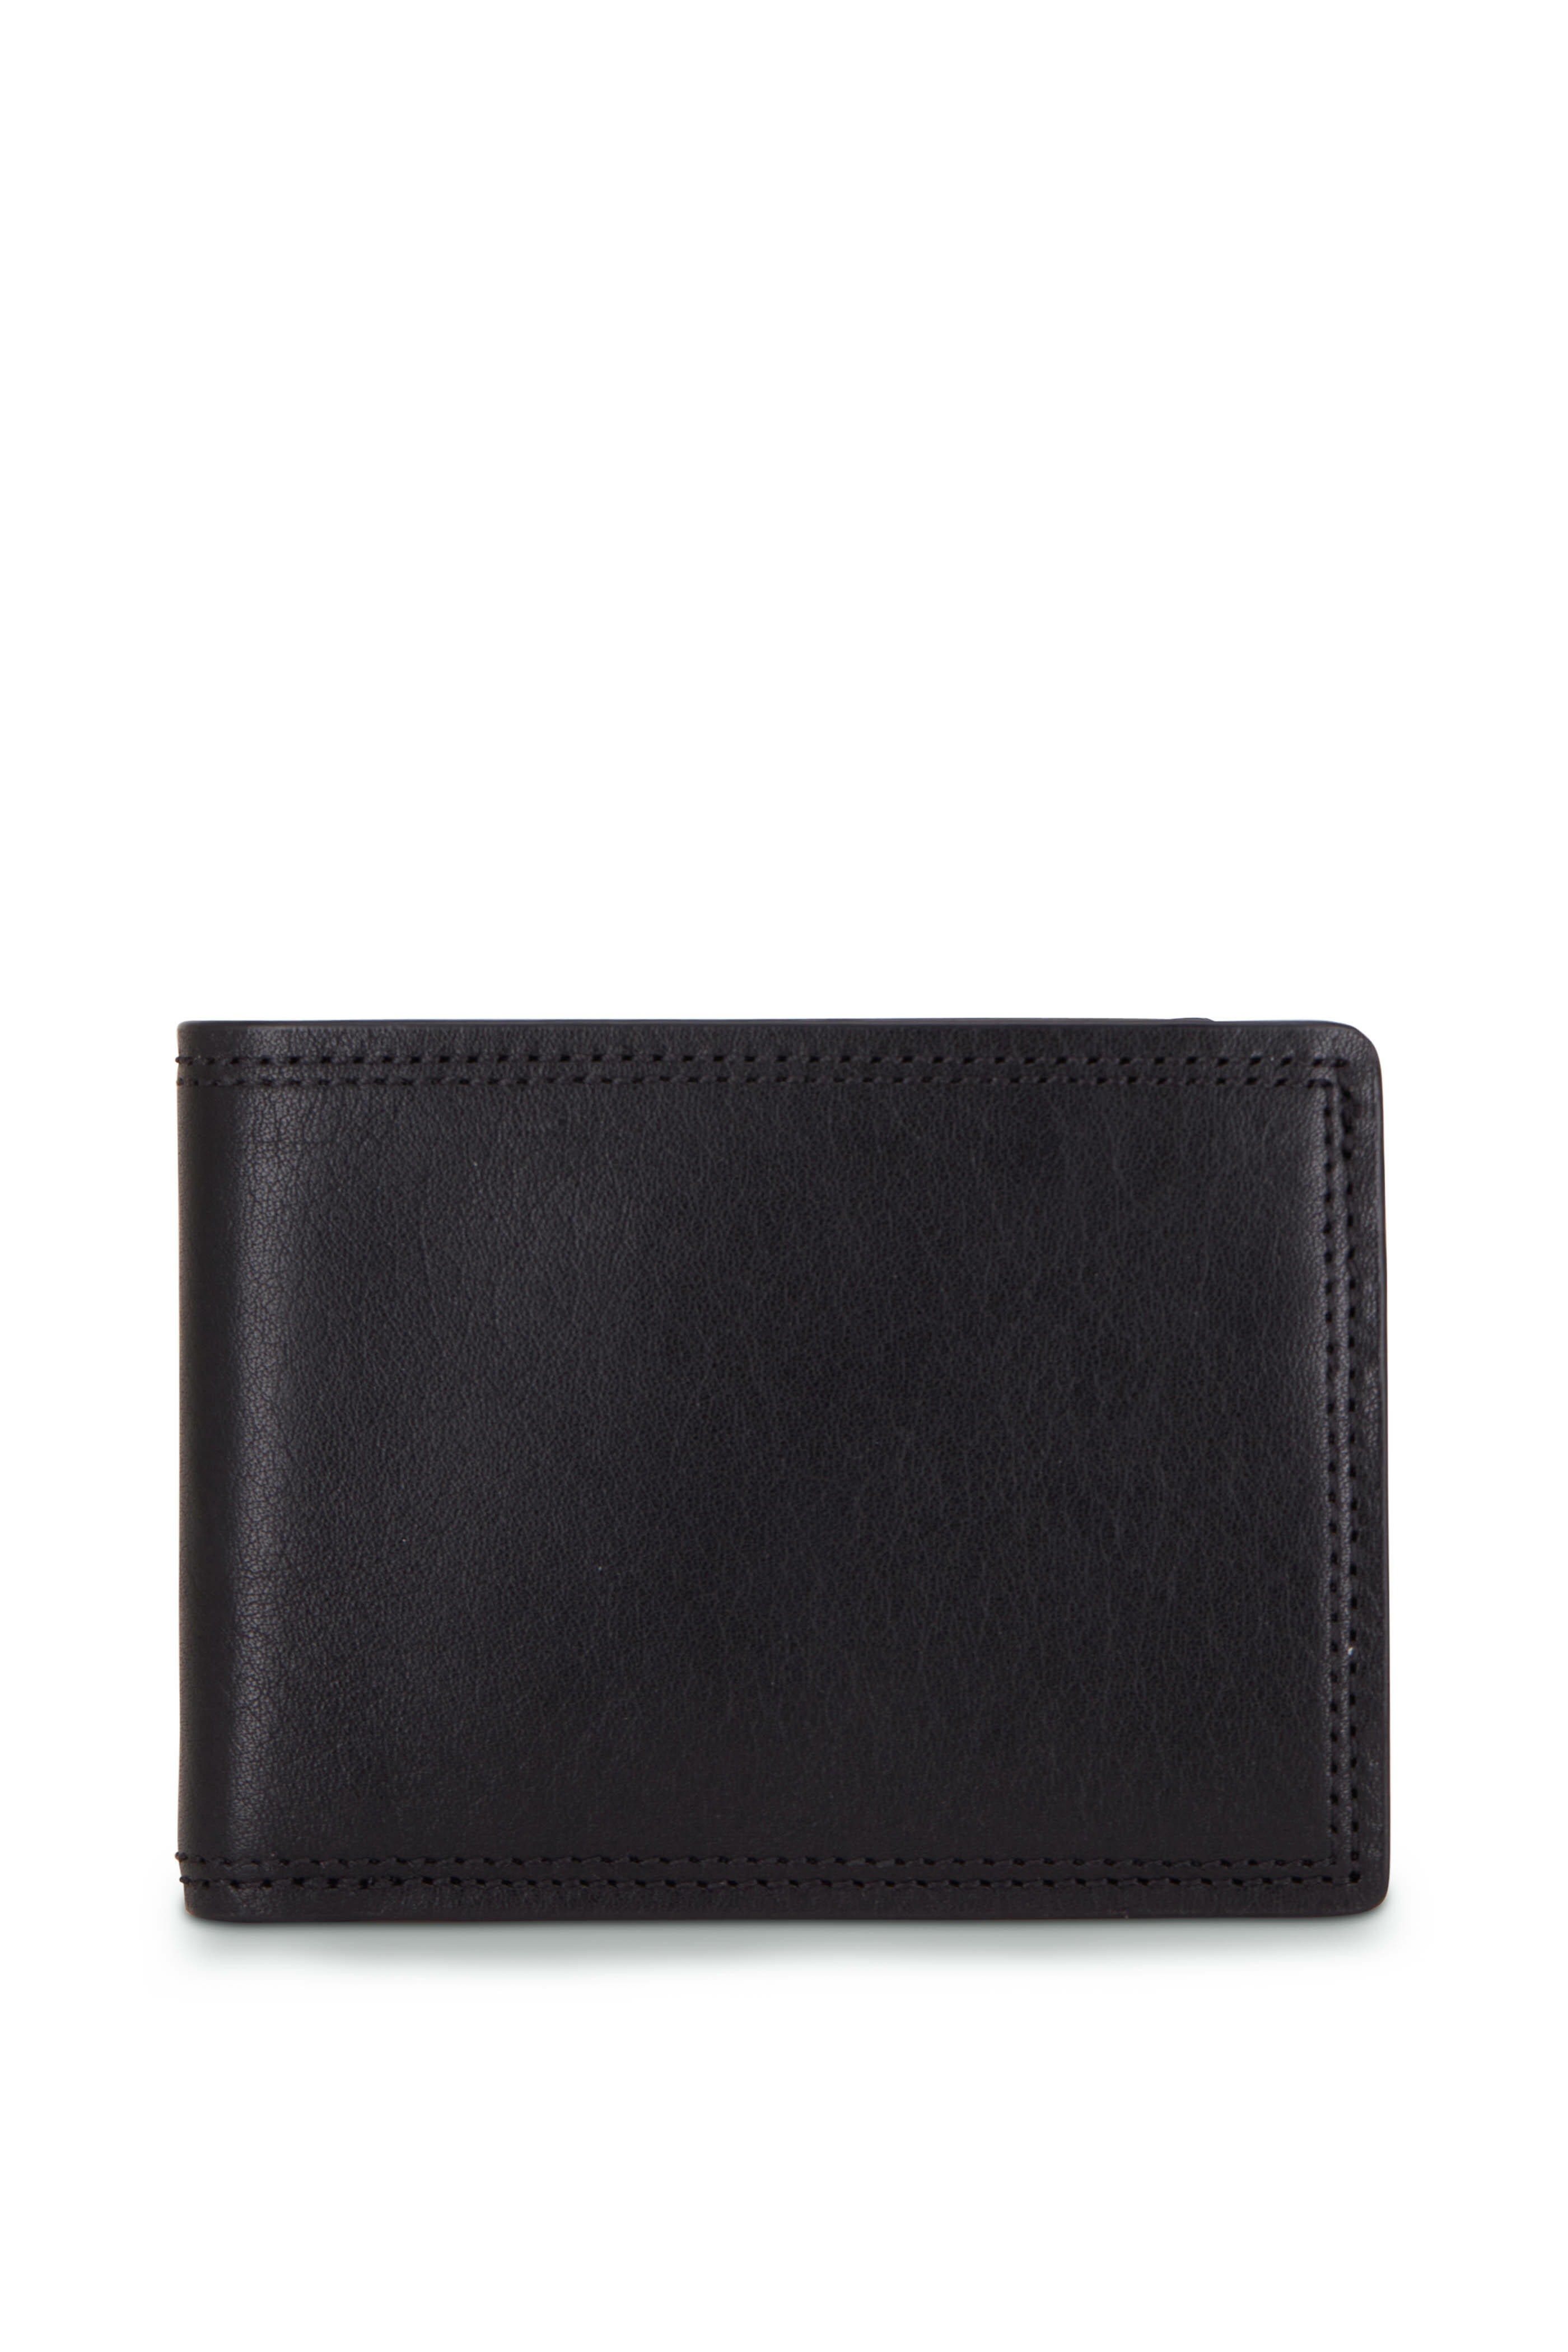 Bosca - Black Leather Small Bifold Wallet | Mitchell Stores